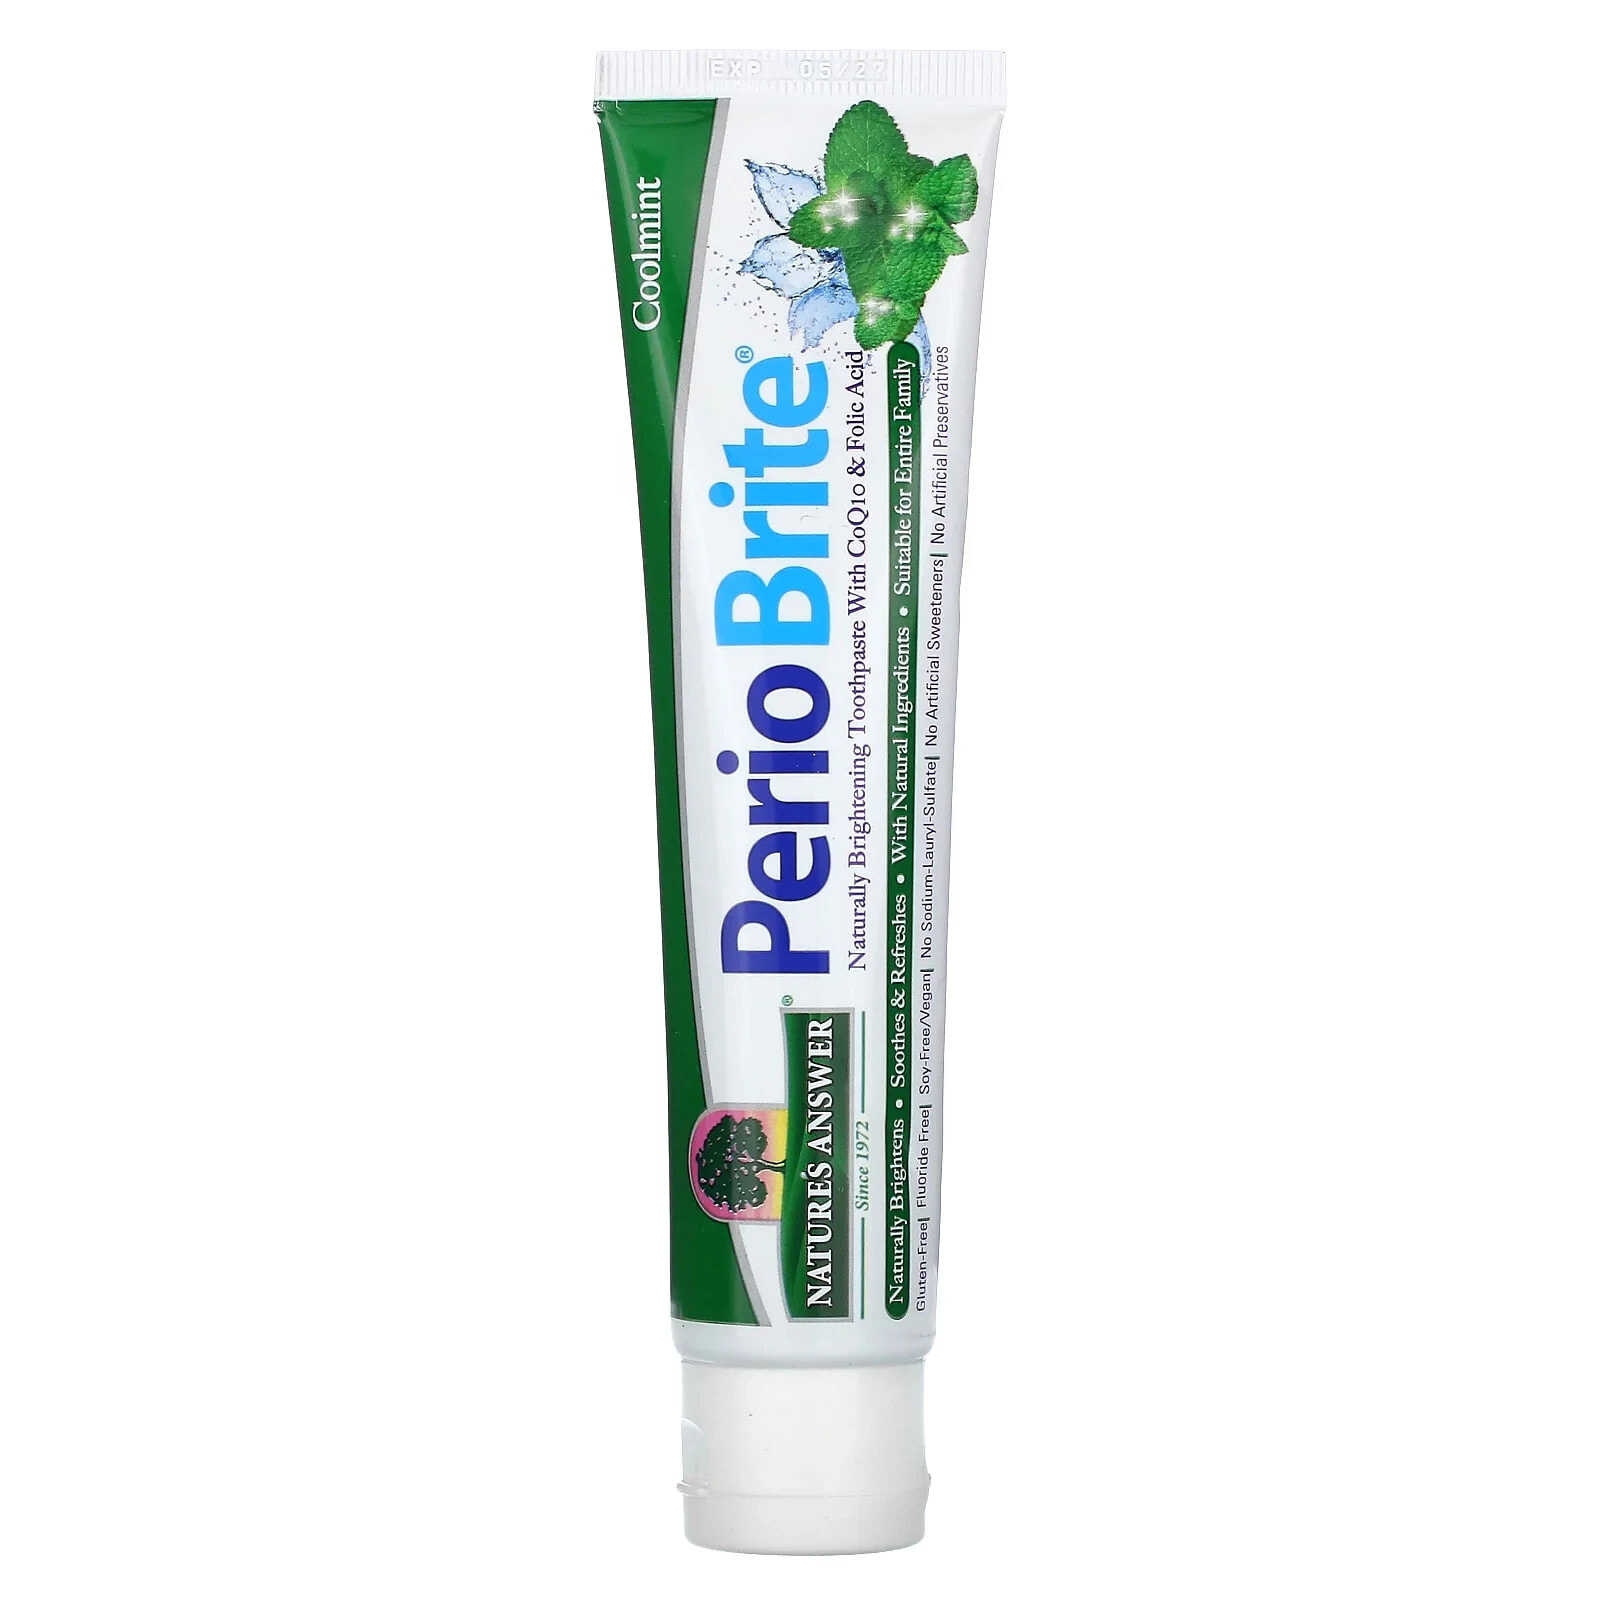 PerioBrite, Toothpaste with Xylitol, Cool Mint, 4 oz (113.4 g)